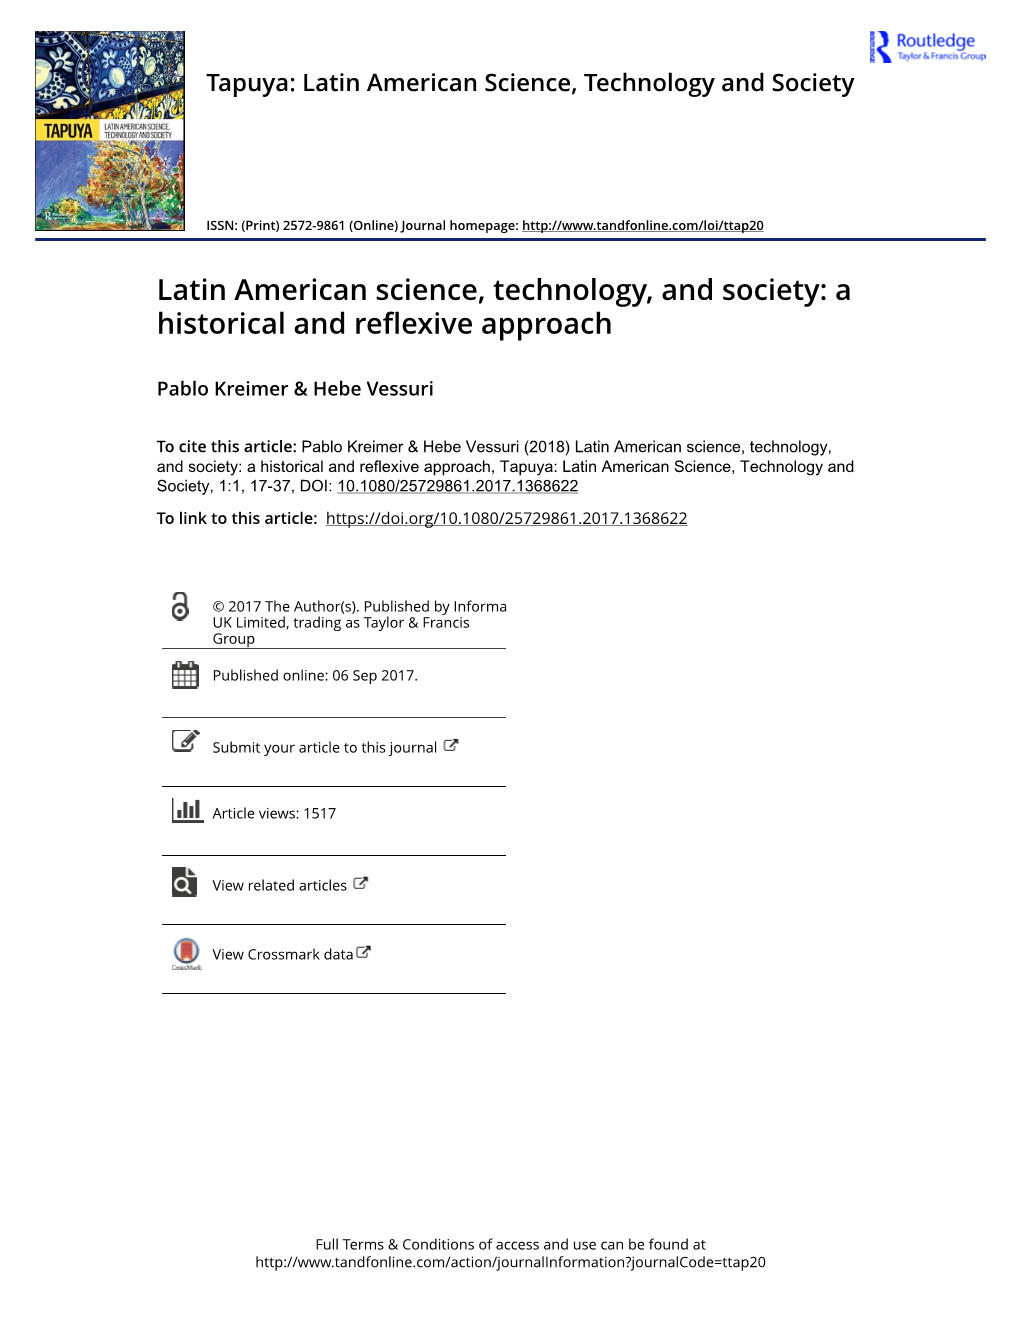 Latin American Science, Technology, and Society: a Historical and Reflexive Approach